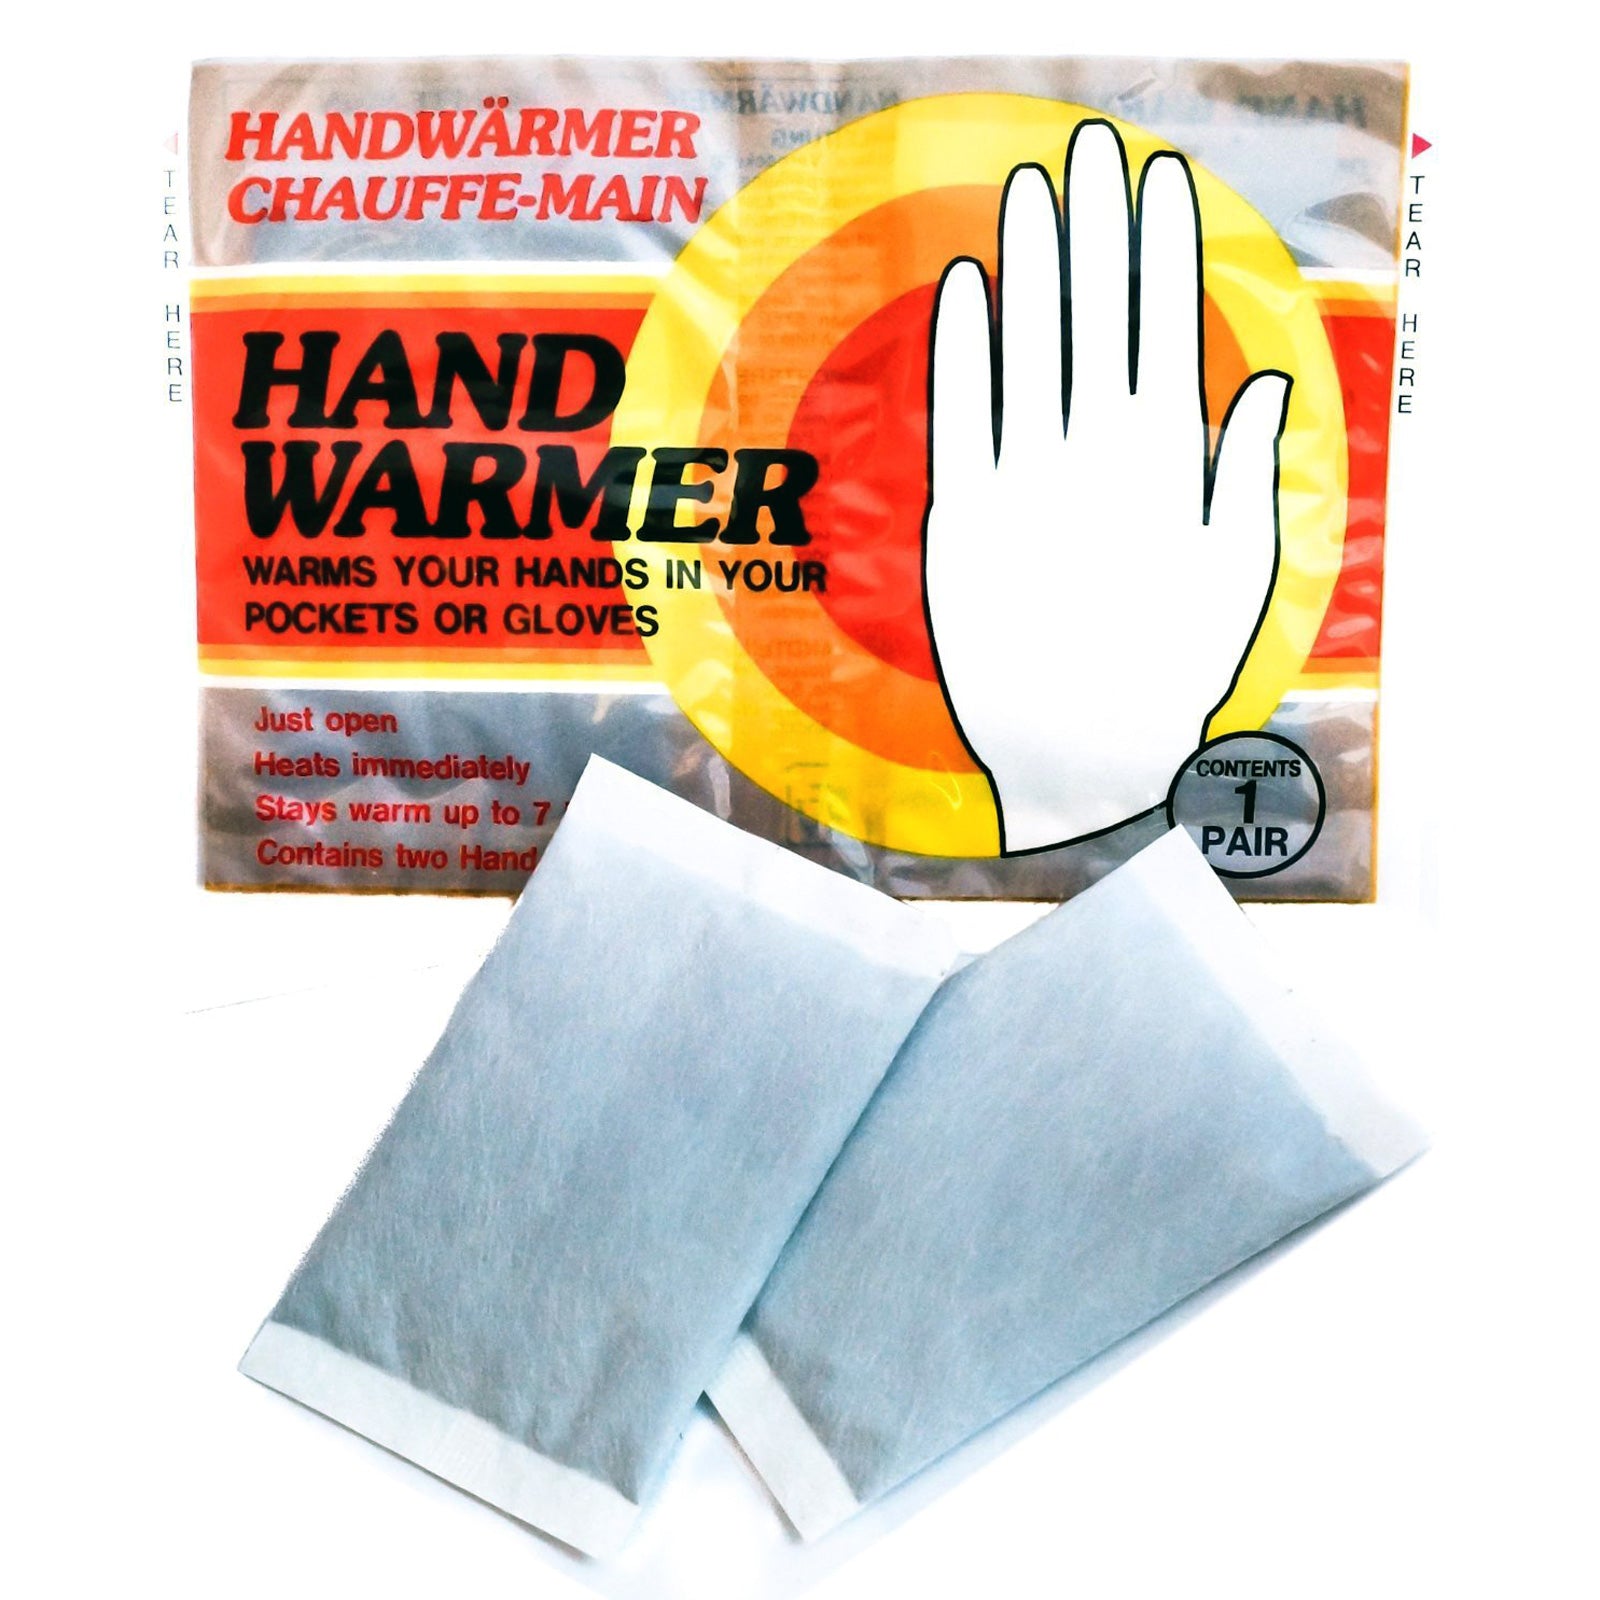 Hand Warmers: How They Work (And Everything Else You Need To Know)